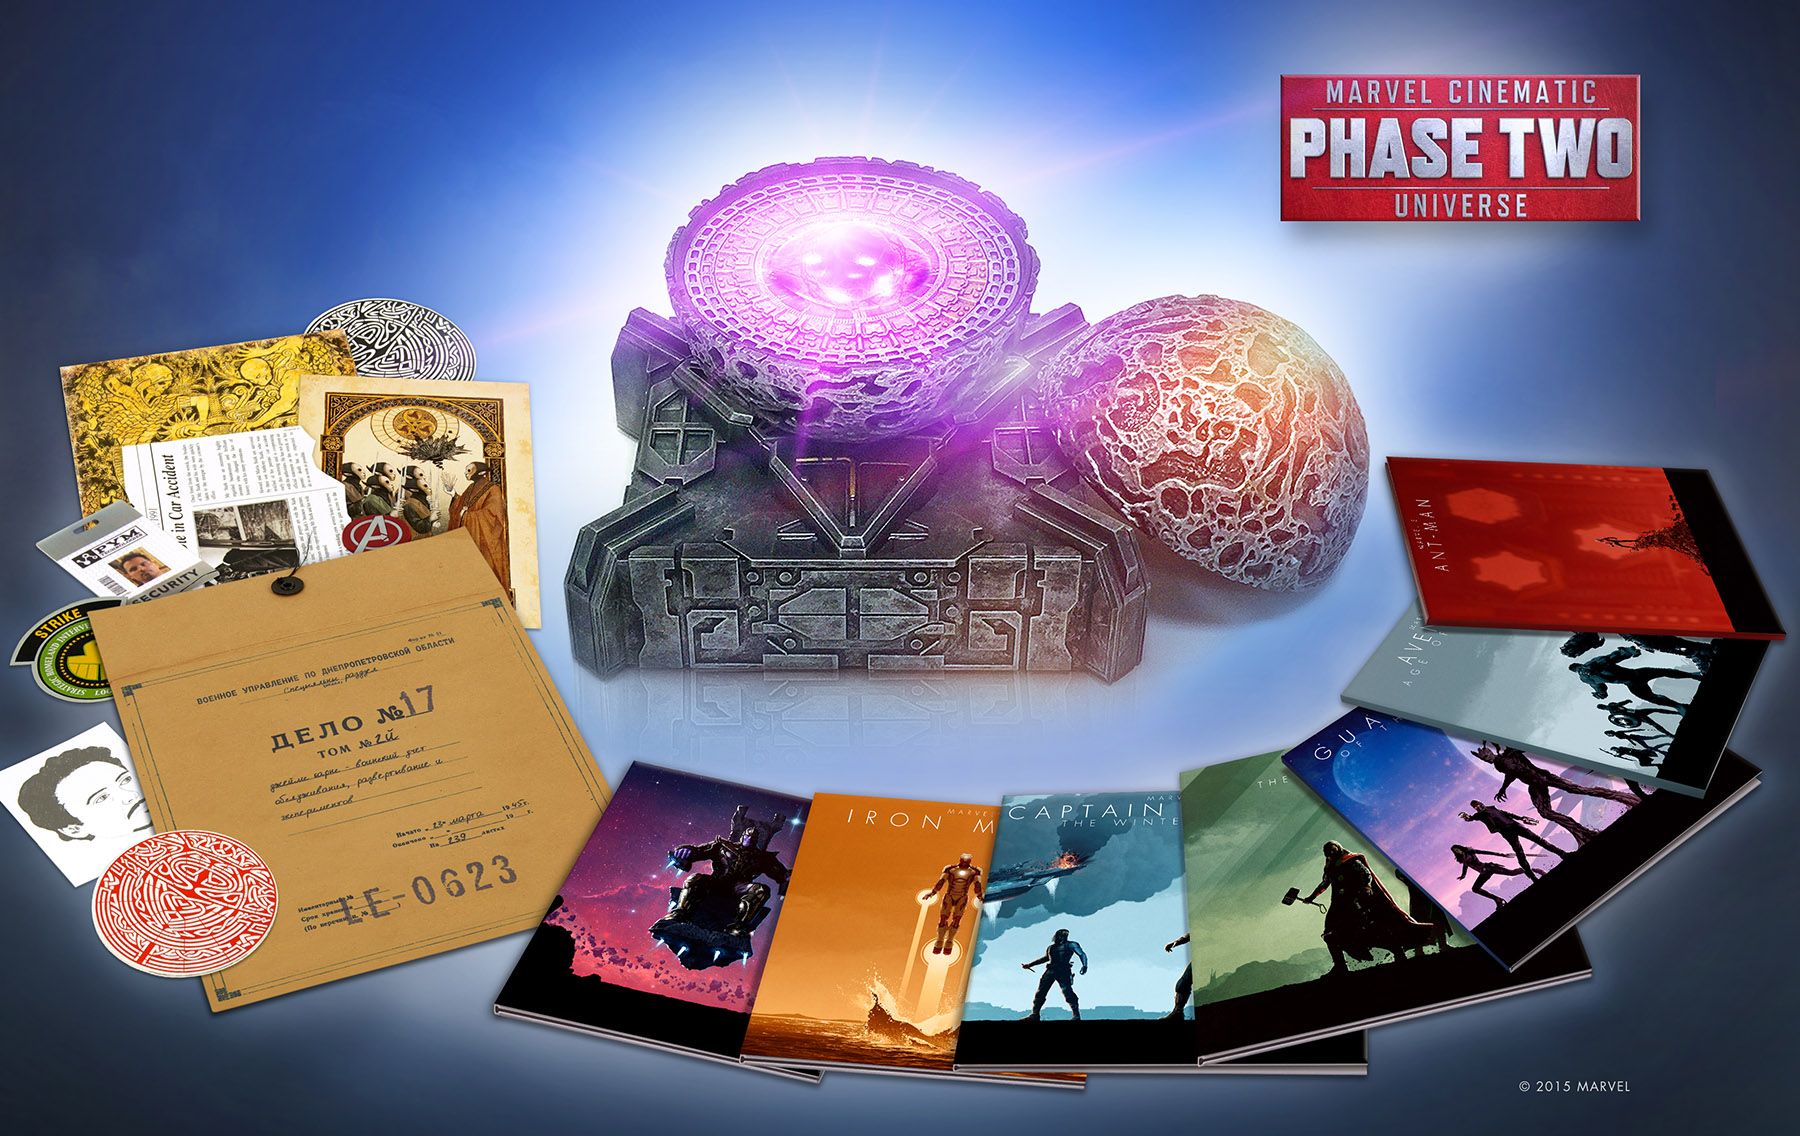 Marvel-Cinematic-Universe-Phase-2-Two-Blu-ray-Collectors-Set.jpg